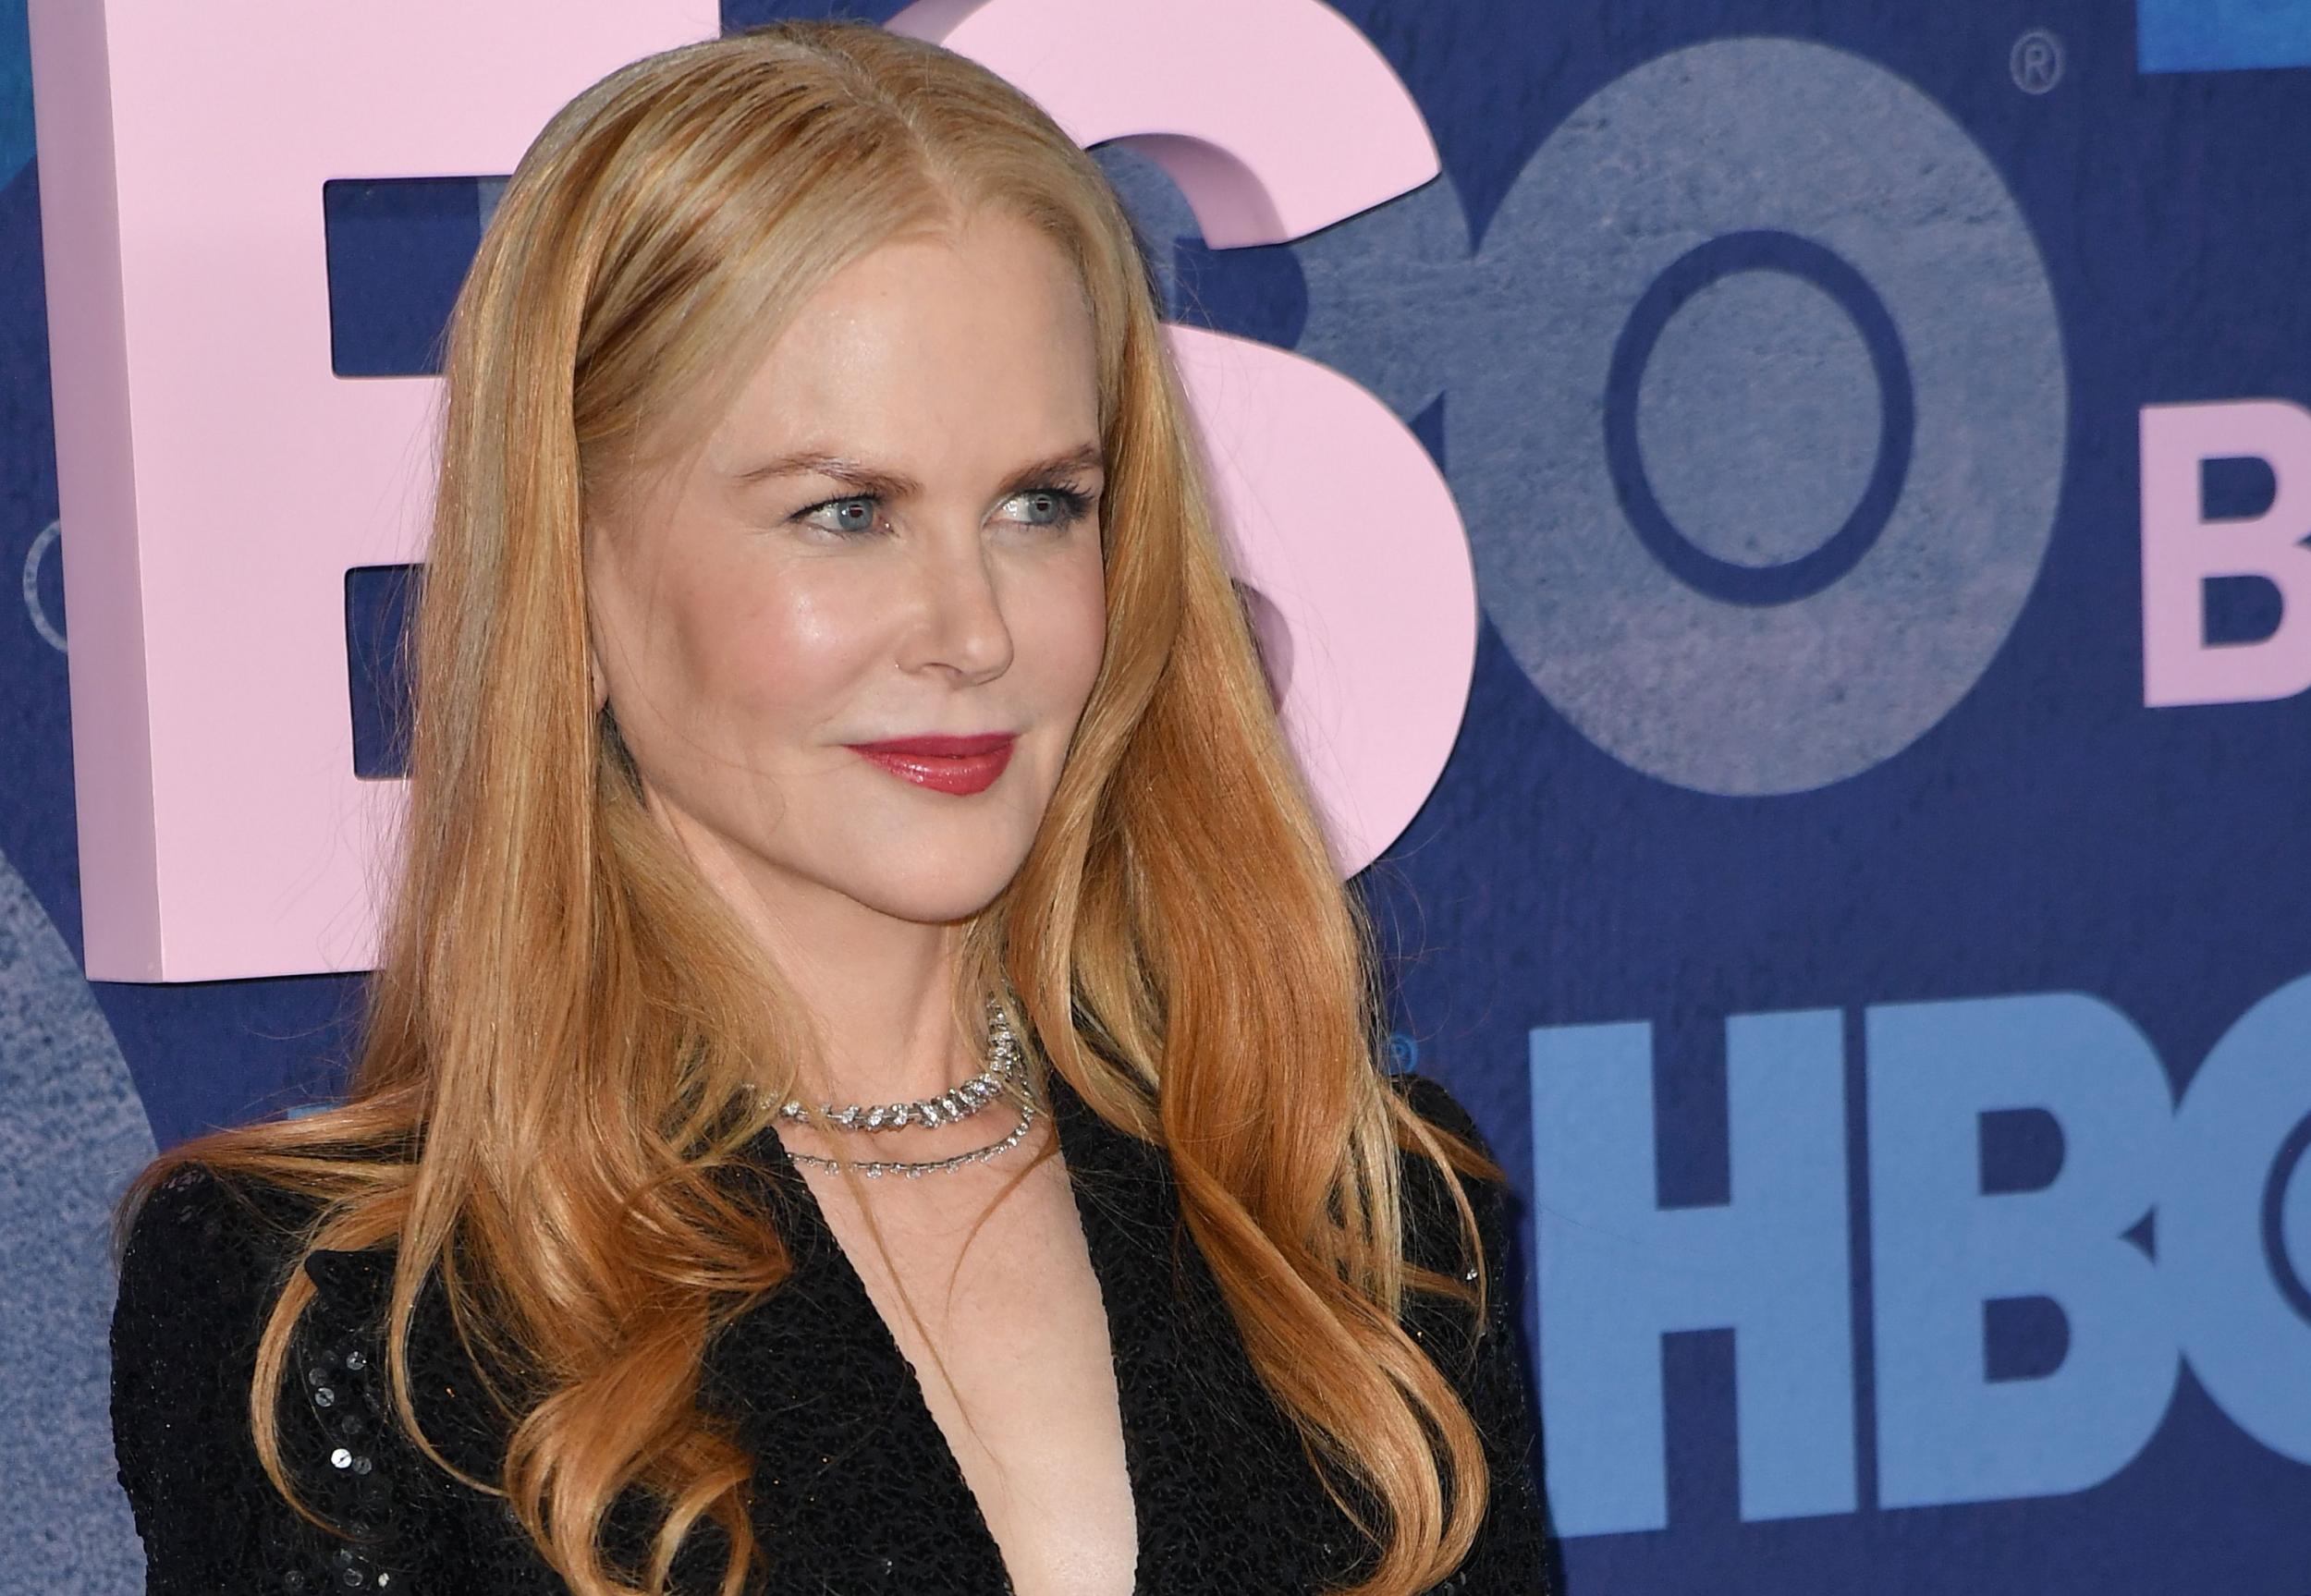 Nicole Kidman attends the "Big Little Lies" Season 2 Premiere at Jazz at Lincoln Center on May 29, 2019 in New York City